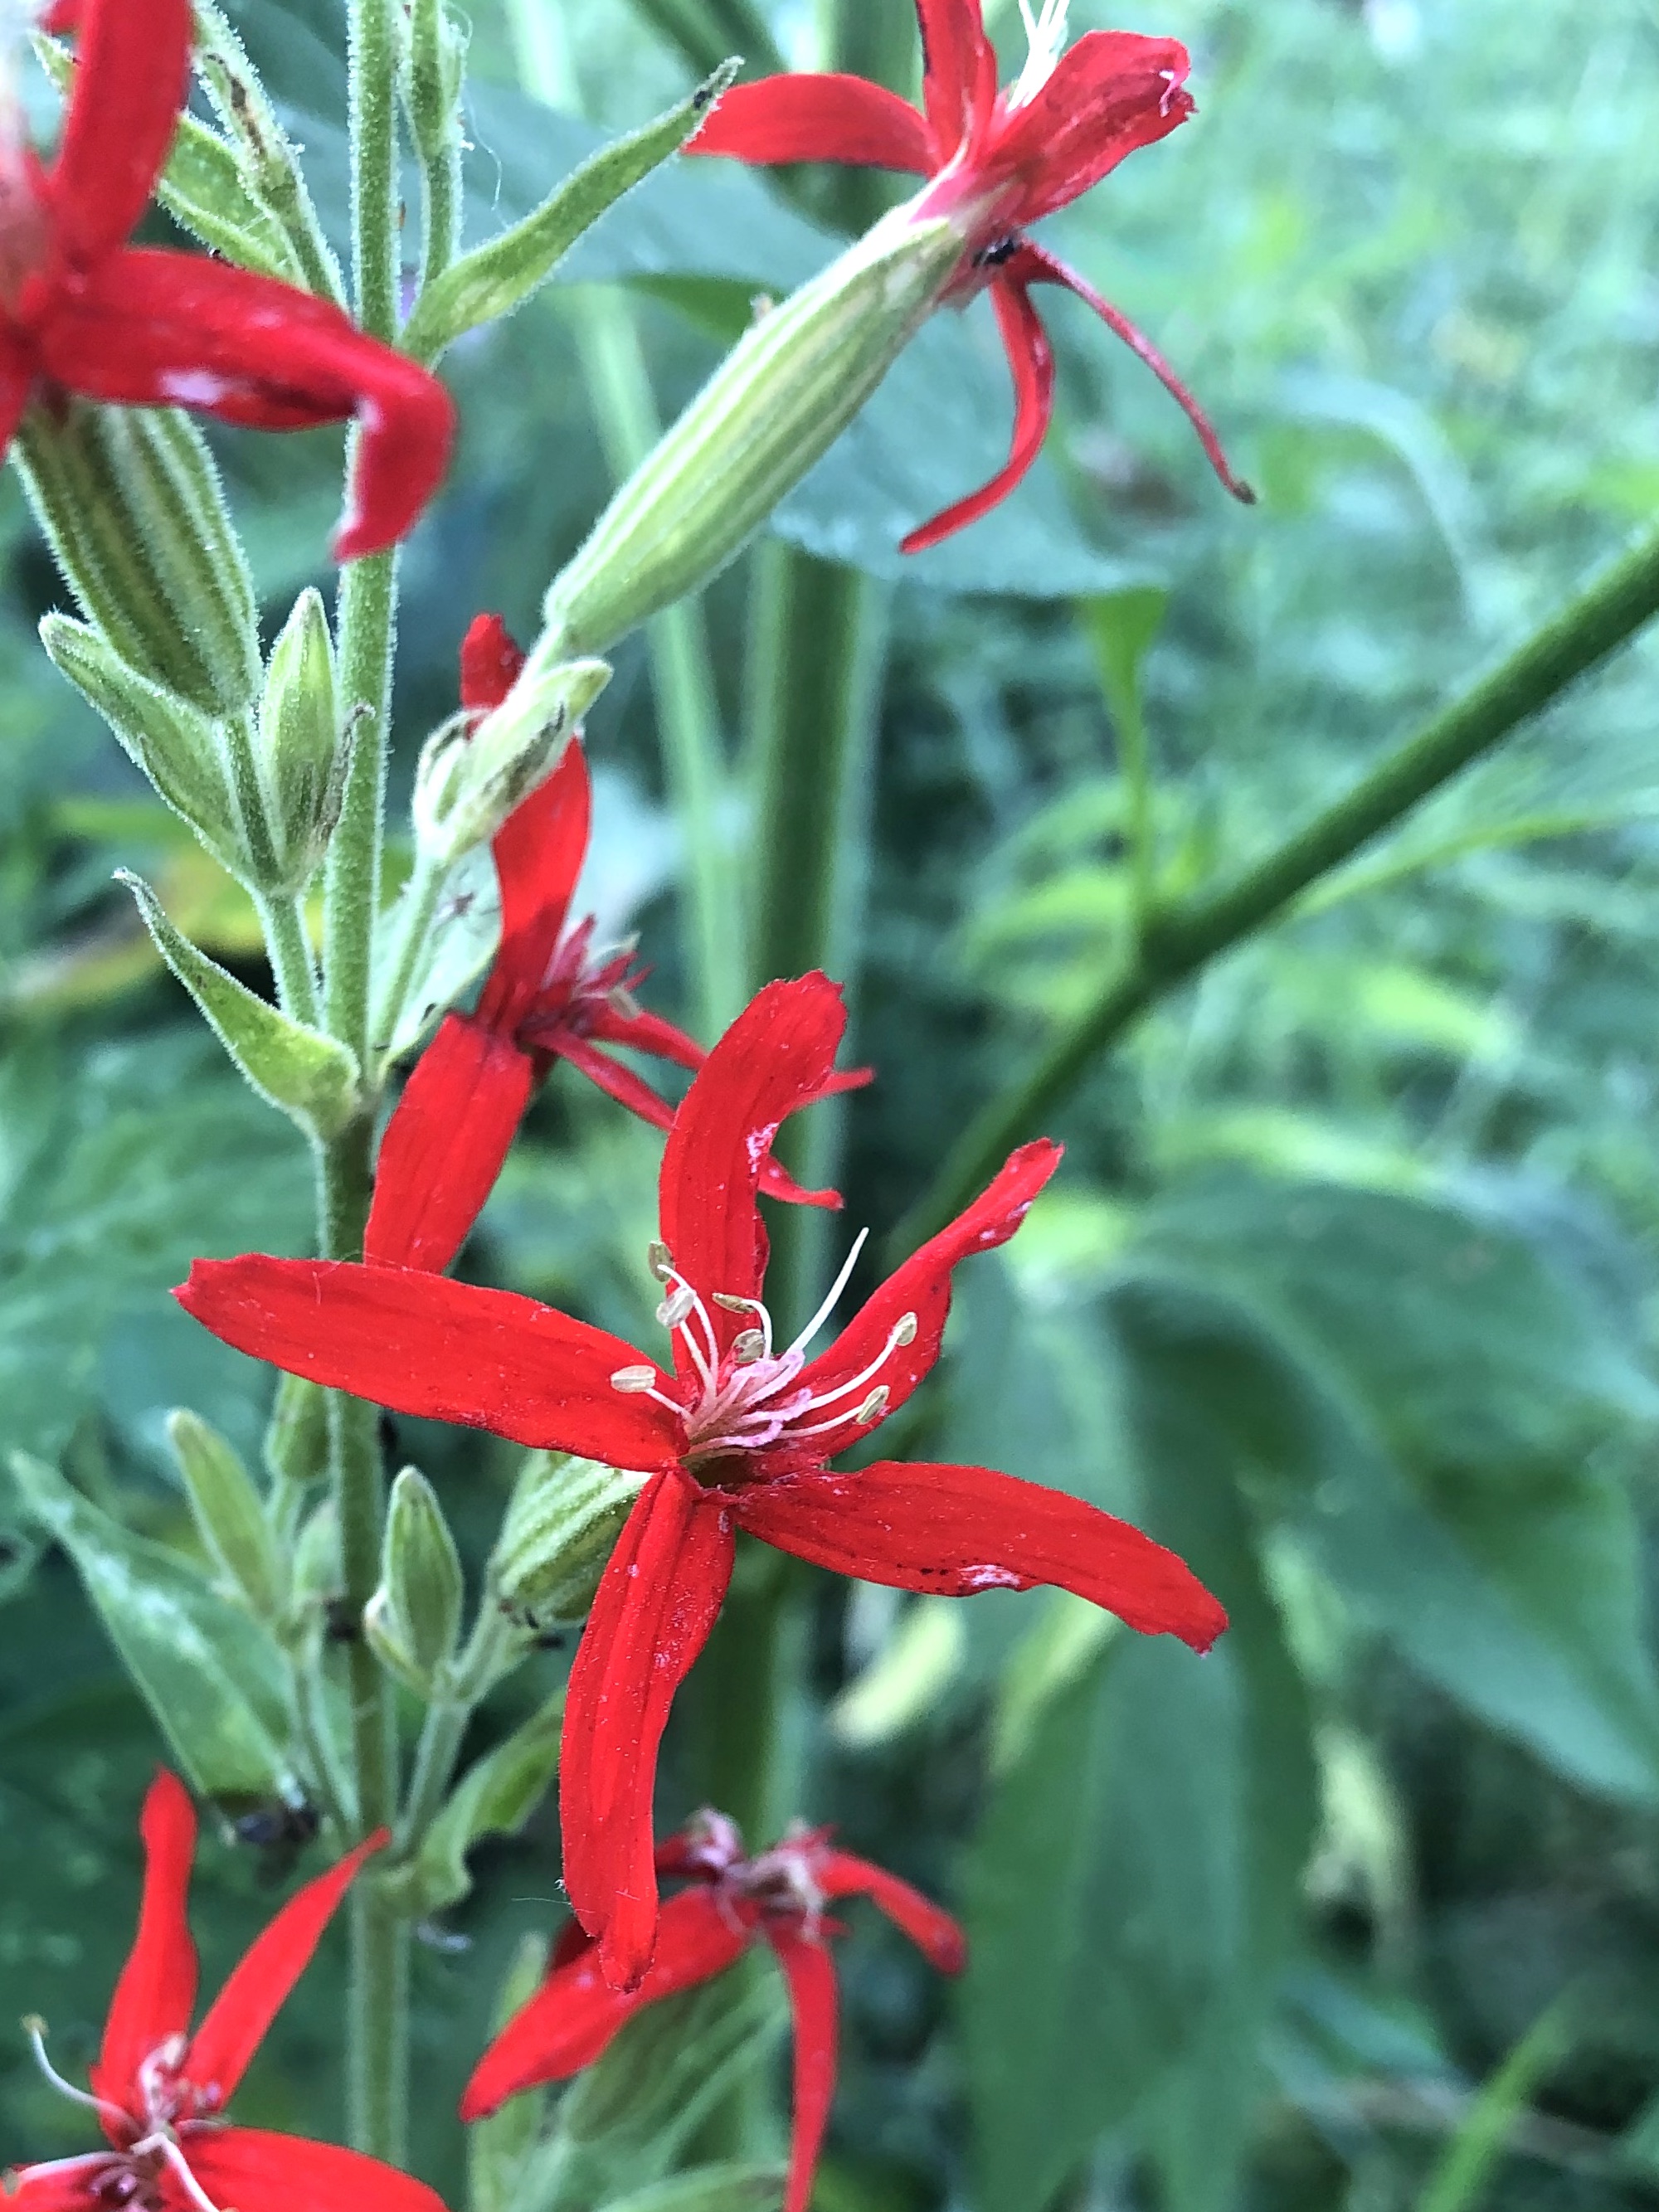 Royal Catchfly in wildflower garden along bike path at Glenway Street in Madison, Wisconsin on July 19, 2022.